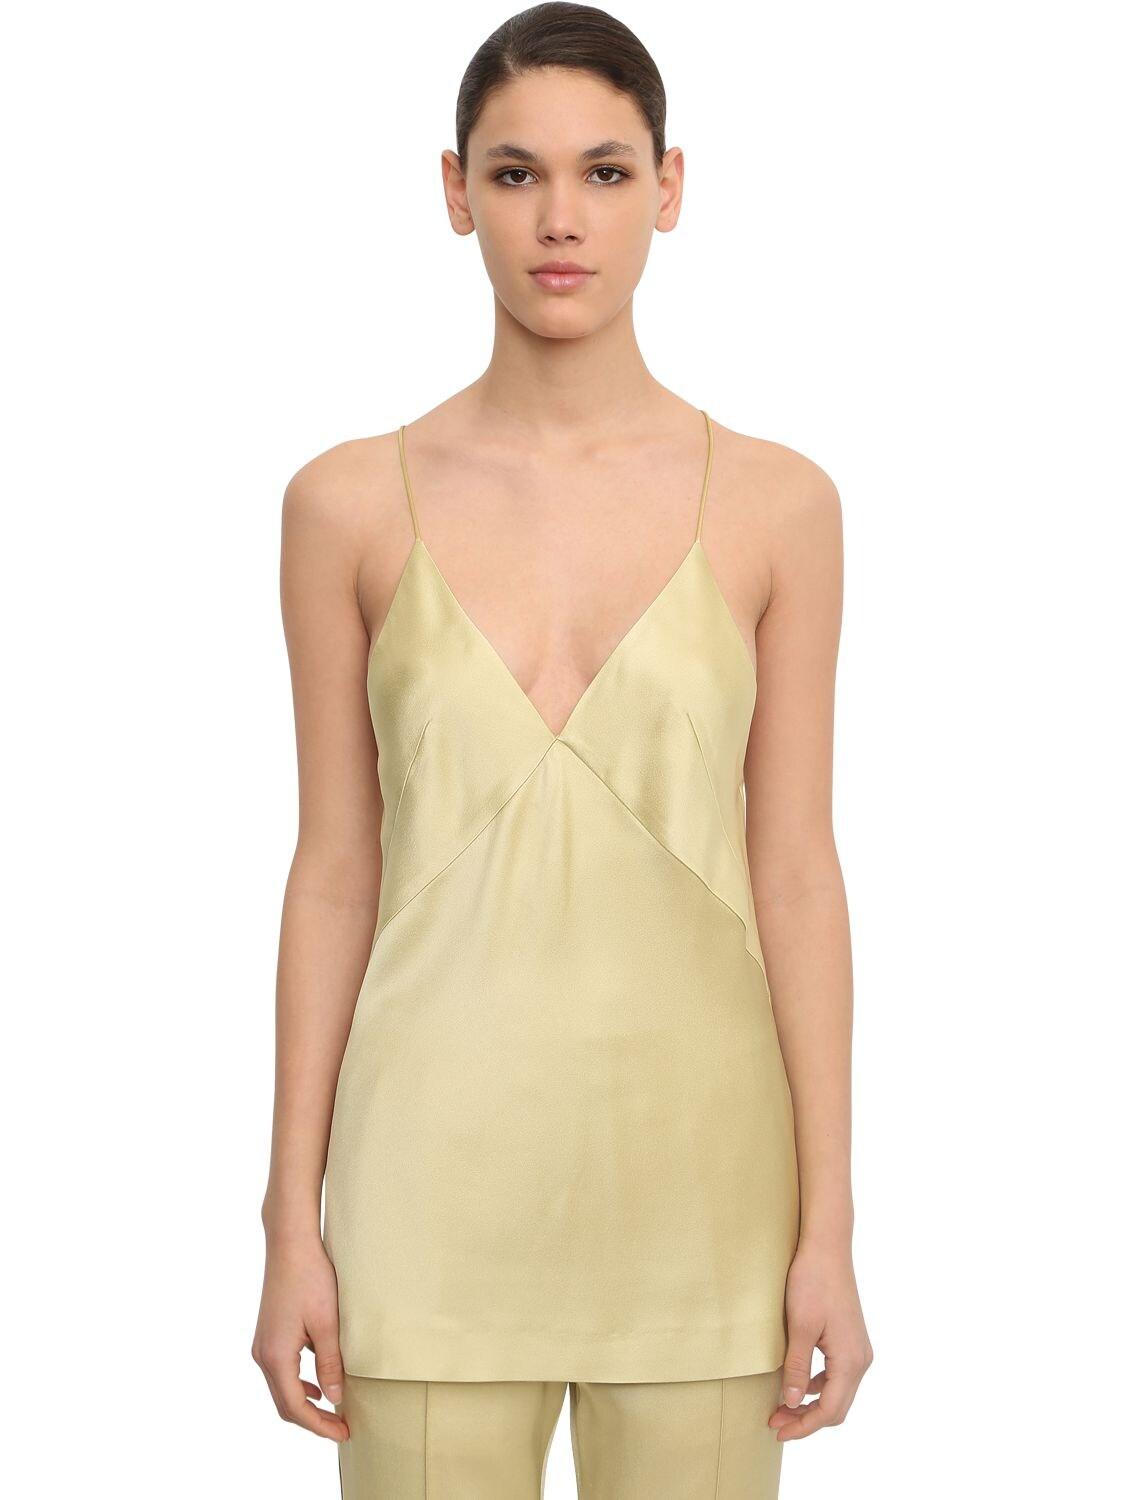 Haider Ackermann Synthetic Shiny Viscose Blend Camisole Top in Light ...